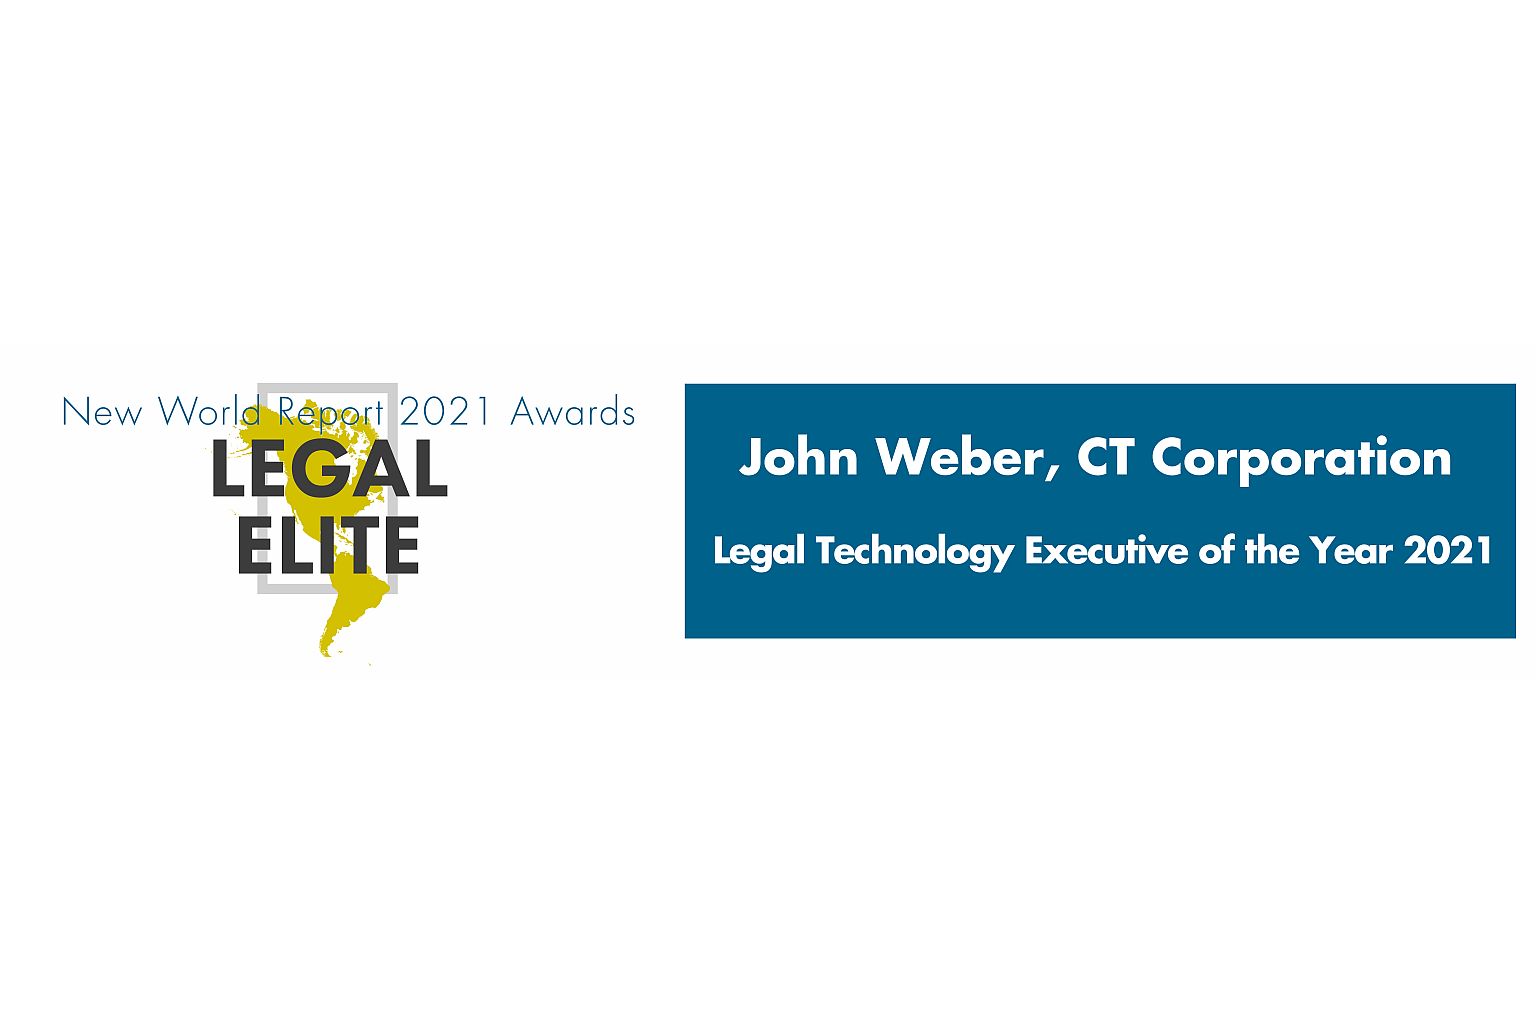 John Weber named Legal Technology Executive of the Year 